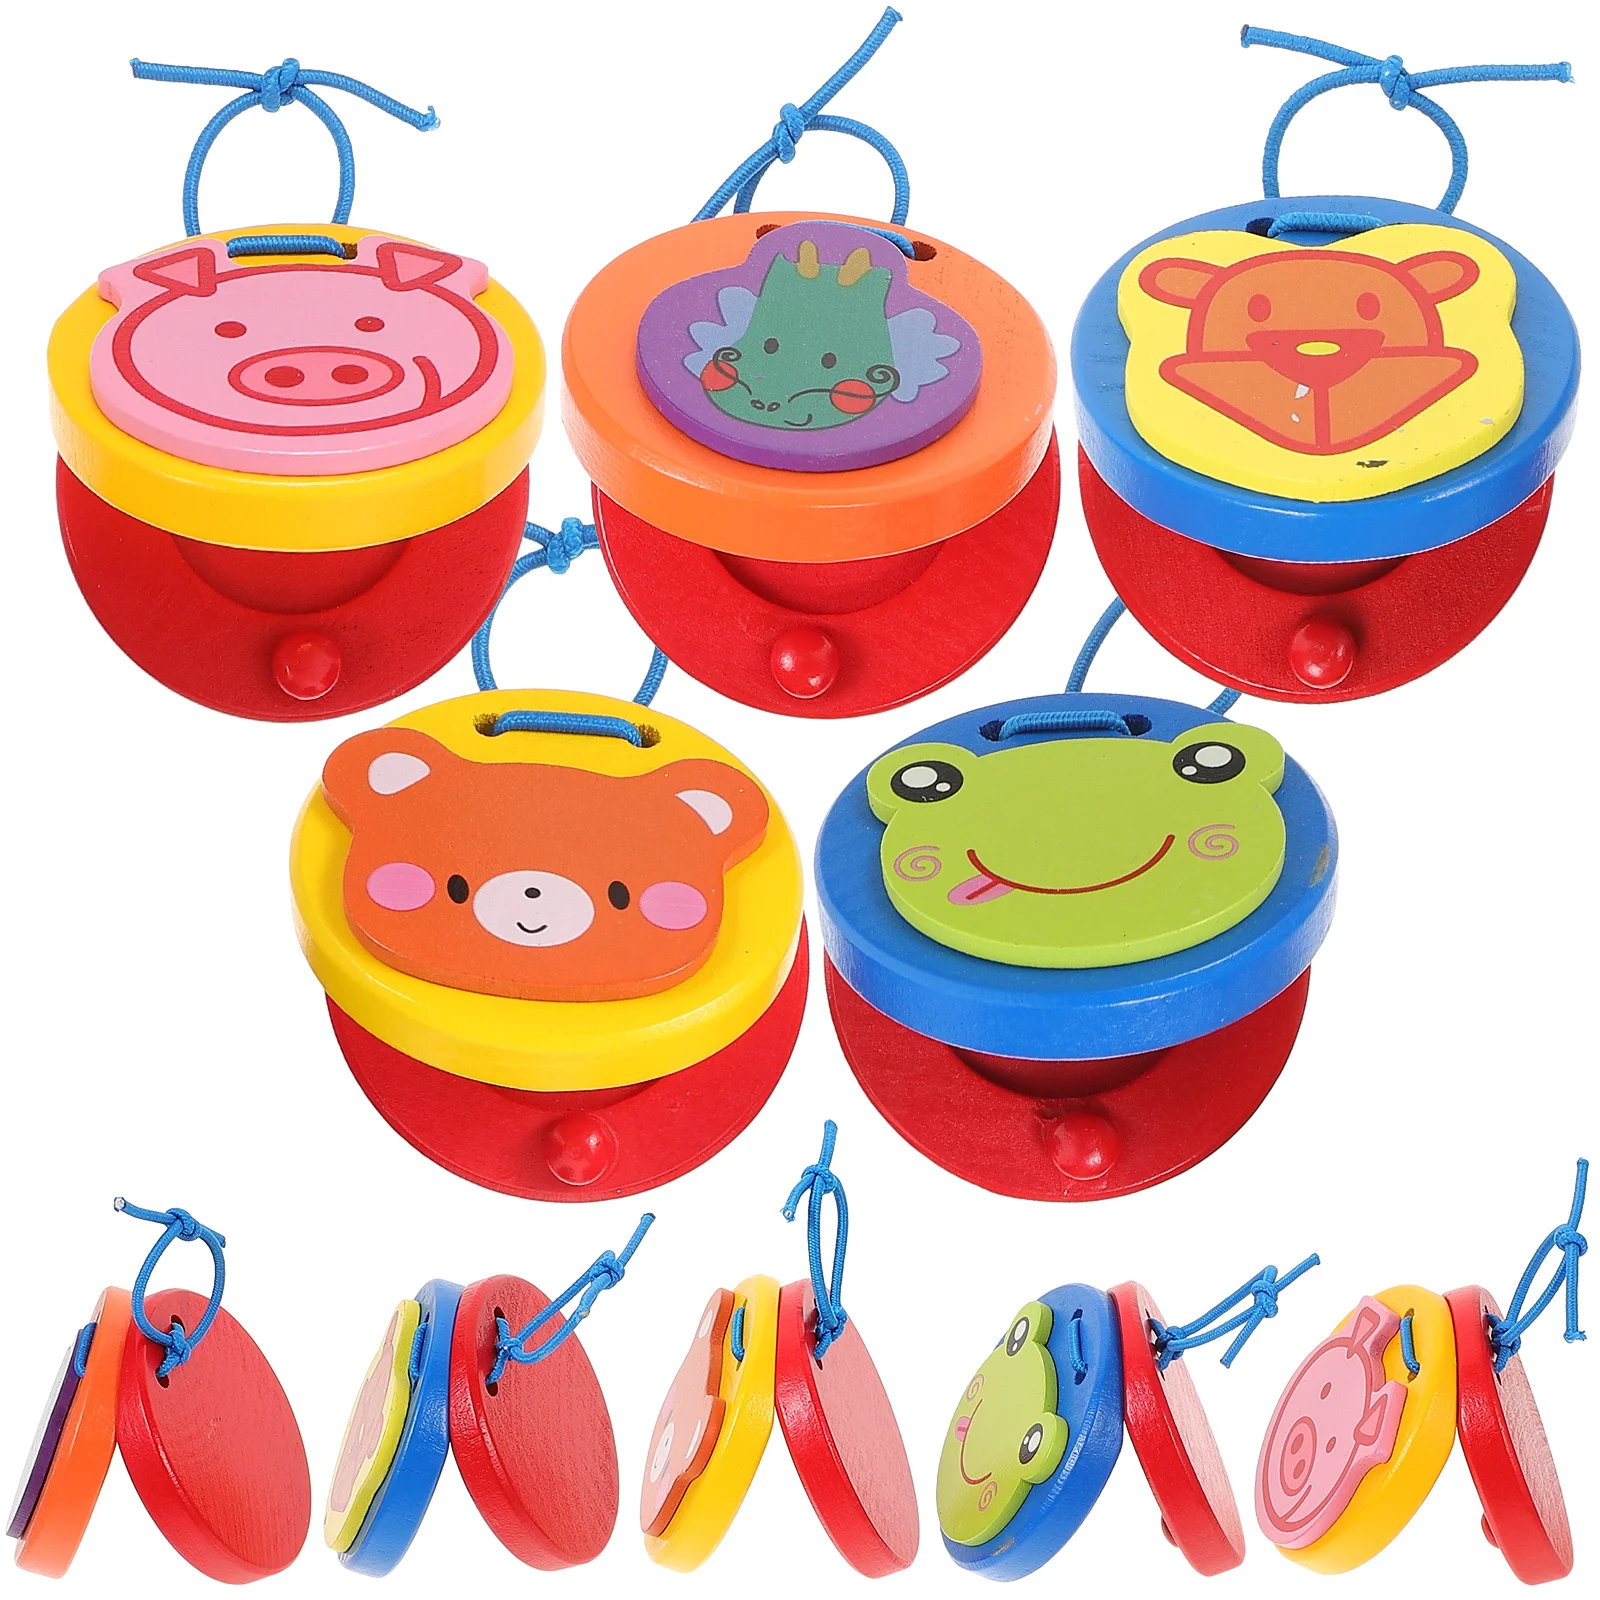 

Cartoon Wooden Castanet Toy Baby Clapper Handle Musical Percussion Instrument Educational Toys For Children